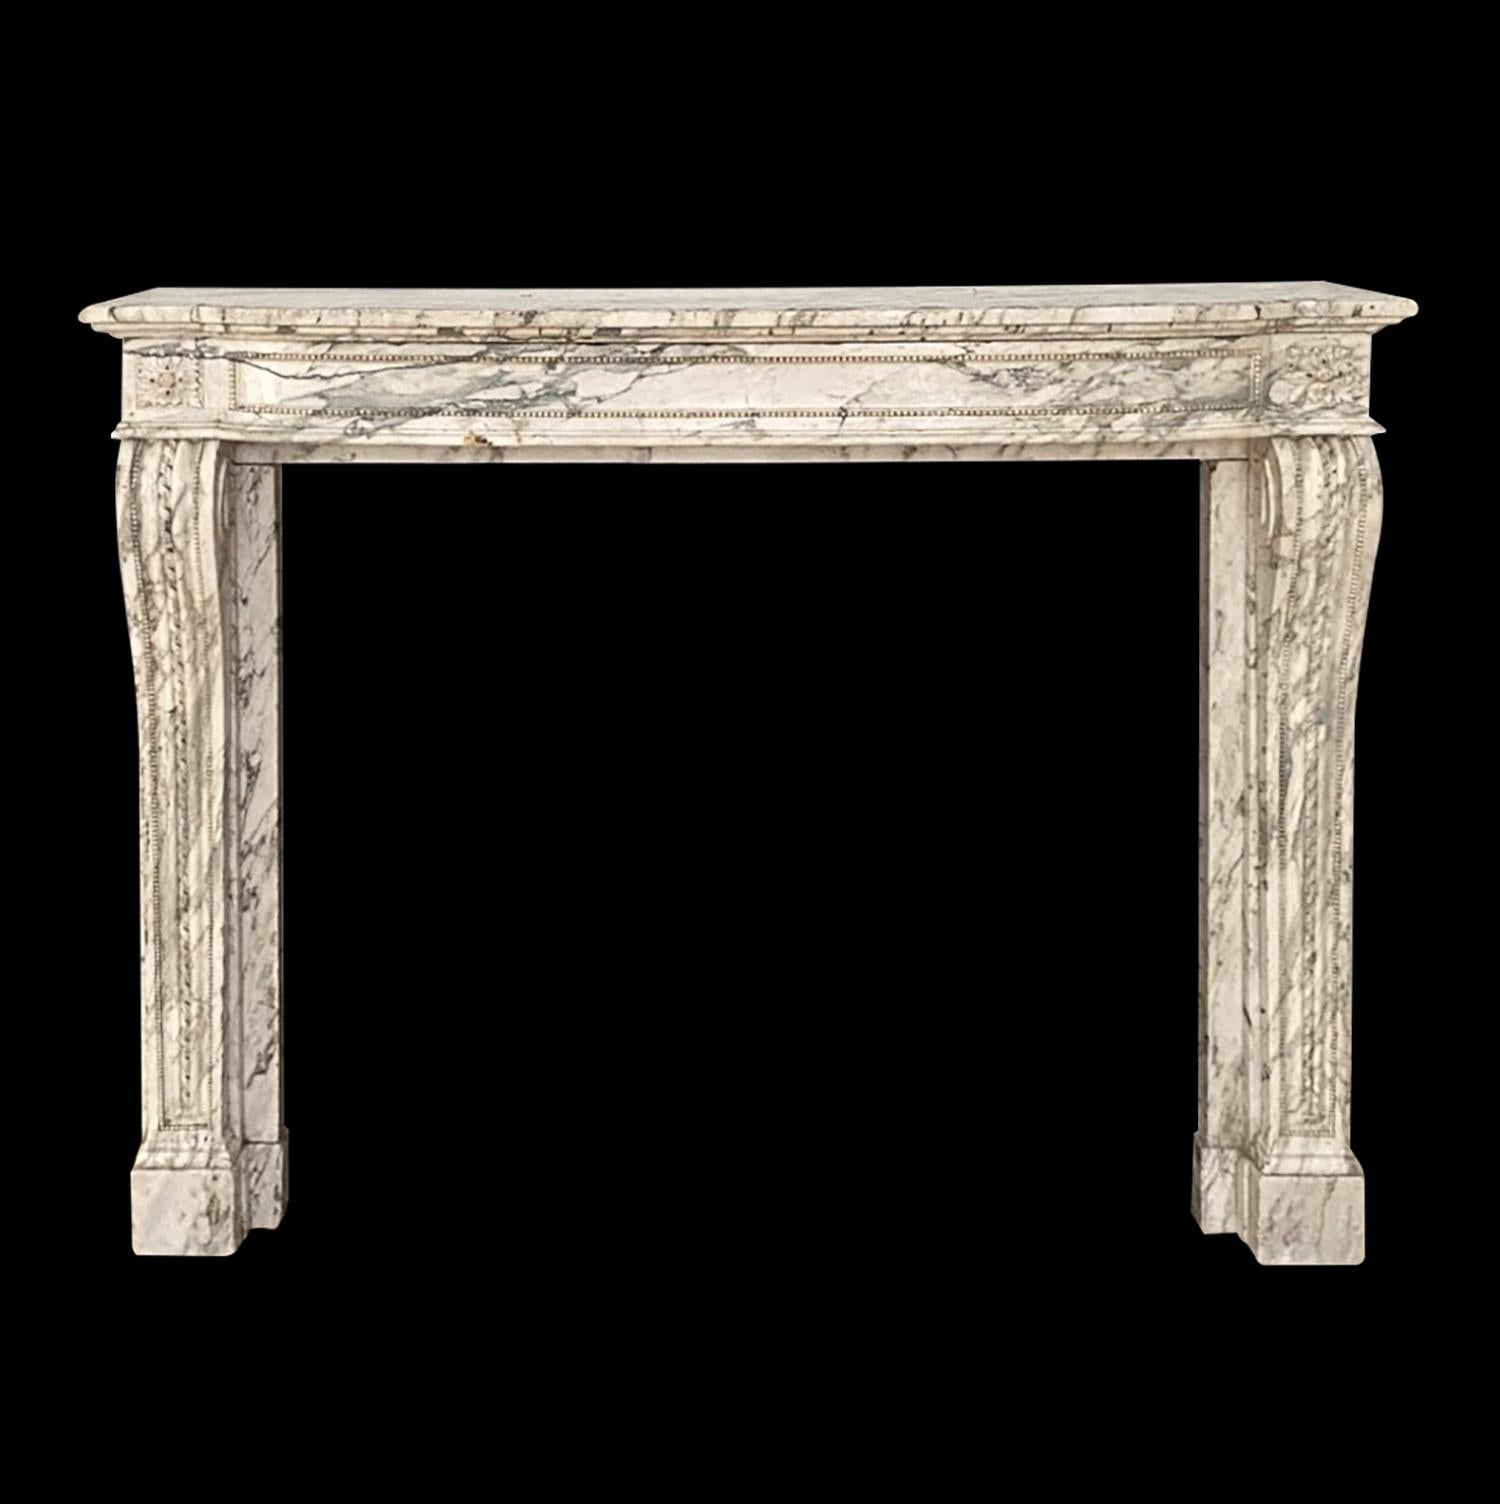 Hand carved white French marble mantel with gray veining. This was retrieved from an estate located in Greenwich, Connecticut. Good condition with appropriate wear from age. One available. Please note, this item is located in one of our NYC